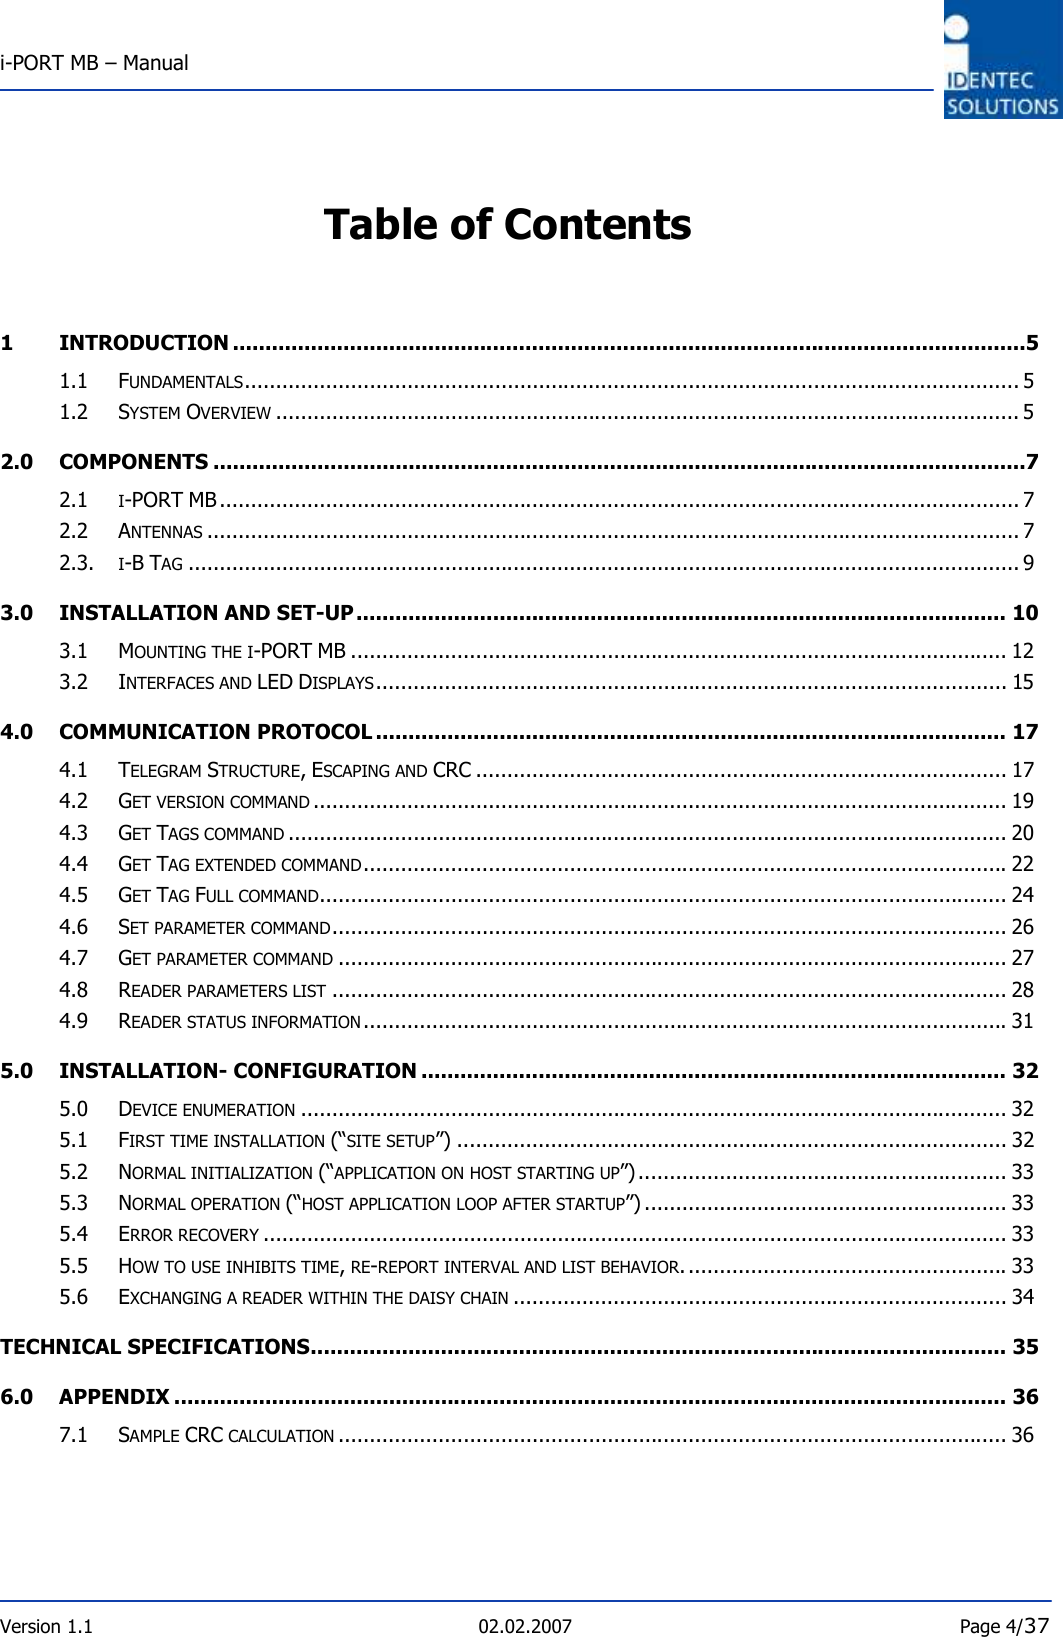  i-PORT MB – Manual       Version 1.1  02.02.2007  Page 4/37  Table of Contents   1 INTRODUCTION ..........................................................................................................................5 1.1 FUNDAMENTALS............................................................................................................................ 5 1.2 SYSTEM OVERVIEW....................................................................................................................... 5 2.0 COMPONENTS .............................................................................................................................7 2.1 I-PORT MB ................................................................................................................................ 7 2.2 ANTENNAS.................................................................................................................................. 7 2.3.  I-B TAG..................................................................................................................................... 9 3.0 INSTALLATION AND SET-UP.................................................................................................... 10 3.1 MOUNTING THE I-PORT MB ......................................................................................................... 12 3.2 INTERFACES AND LED DISPLAYS..................................................................................................... 15 4.0 COMMUNICATION PROTOCOL ................................................................................................. 17 4.1 TELEGRAM STRUCTURE, ESCAPING AND CRC ..................................................................................... 17 4.2 GET VERSION COMMAND............................................................................................................... 19 4.3 GET TAGS COMMAND................................................................................................................... 20 4.4 GET TAG EXTENDED COMMAND....................................................................................................... 22 4.5 GET TAG FULL COMMAND.............................................................................................................. 24 4.6 SET PARAMETER COMMAND............................................................................................................ 26 4.7 GET PARAMETER COMMAND........................................................................................................... 27 4.8 READER PARAMETERS LIST............................................................................................................ 28 4.9 READER STATUS INFORMATION....................................................................................................... 31 5.0 INSTALLATION- CONFIGURATION .......................................................................................... 32 5.0 DEVICE ENUMERATION................................................................................................................. 32 5.1 FIRST TIME INSTALLATION (“SITE SETUP”) ........................................................................................ 32 5.2 NORMAL INITIALIZATION (“APPLICATION ON HOST STARTING UP”)........................................................... 33 5.3 NORMAL OPERATION (“HOST APPLICATION LOOP AFTER STARTUP”) .......................................................... 33 5.4 ERROR RECOVERY....................................................................................................................... 33 5.5 HOW TO USE INHIBITS TIME, RE-REPORT INTERVAL AND LIST BEHAVIOR.................................................... 33 5.6 EXCHANGING A READER WITHIN THE DAISY CHAIN............................................................................... 34 TECHNICAL SPECIFICATIONS........................................................................................................... 35 6.0 APPENDIX ................................................................................................................................ 36 7.1 SAMPLE CRC CALCULATION........................................................................................................... 36 